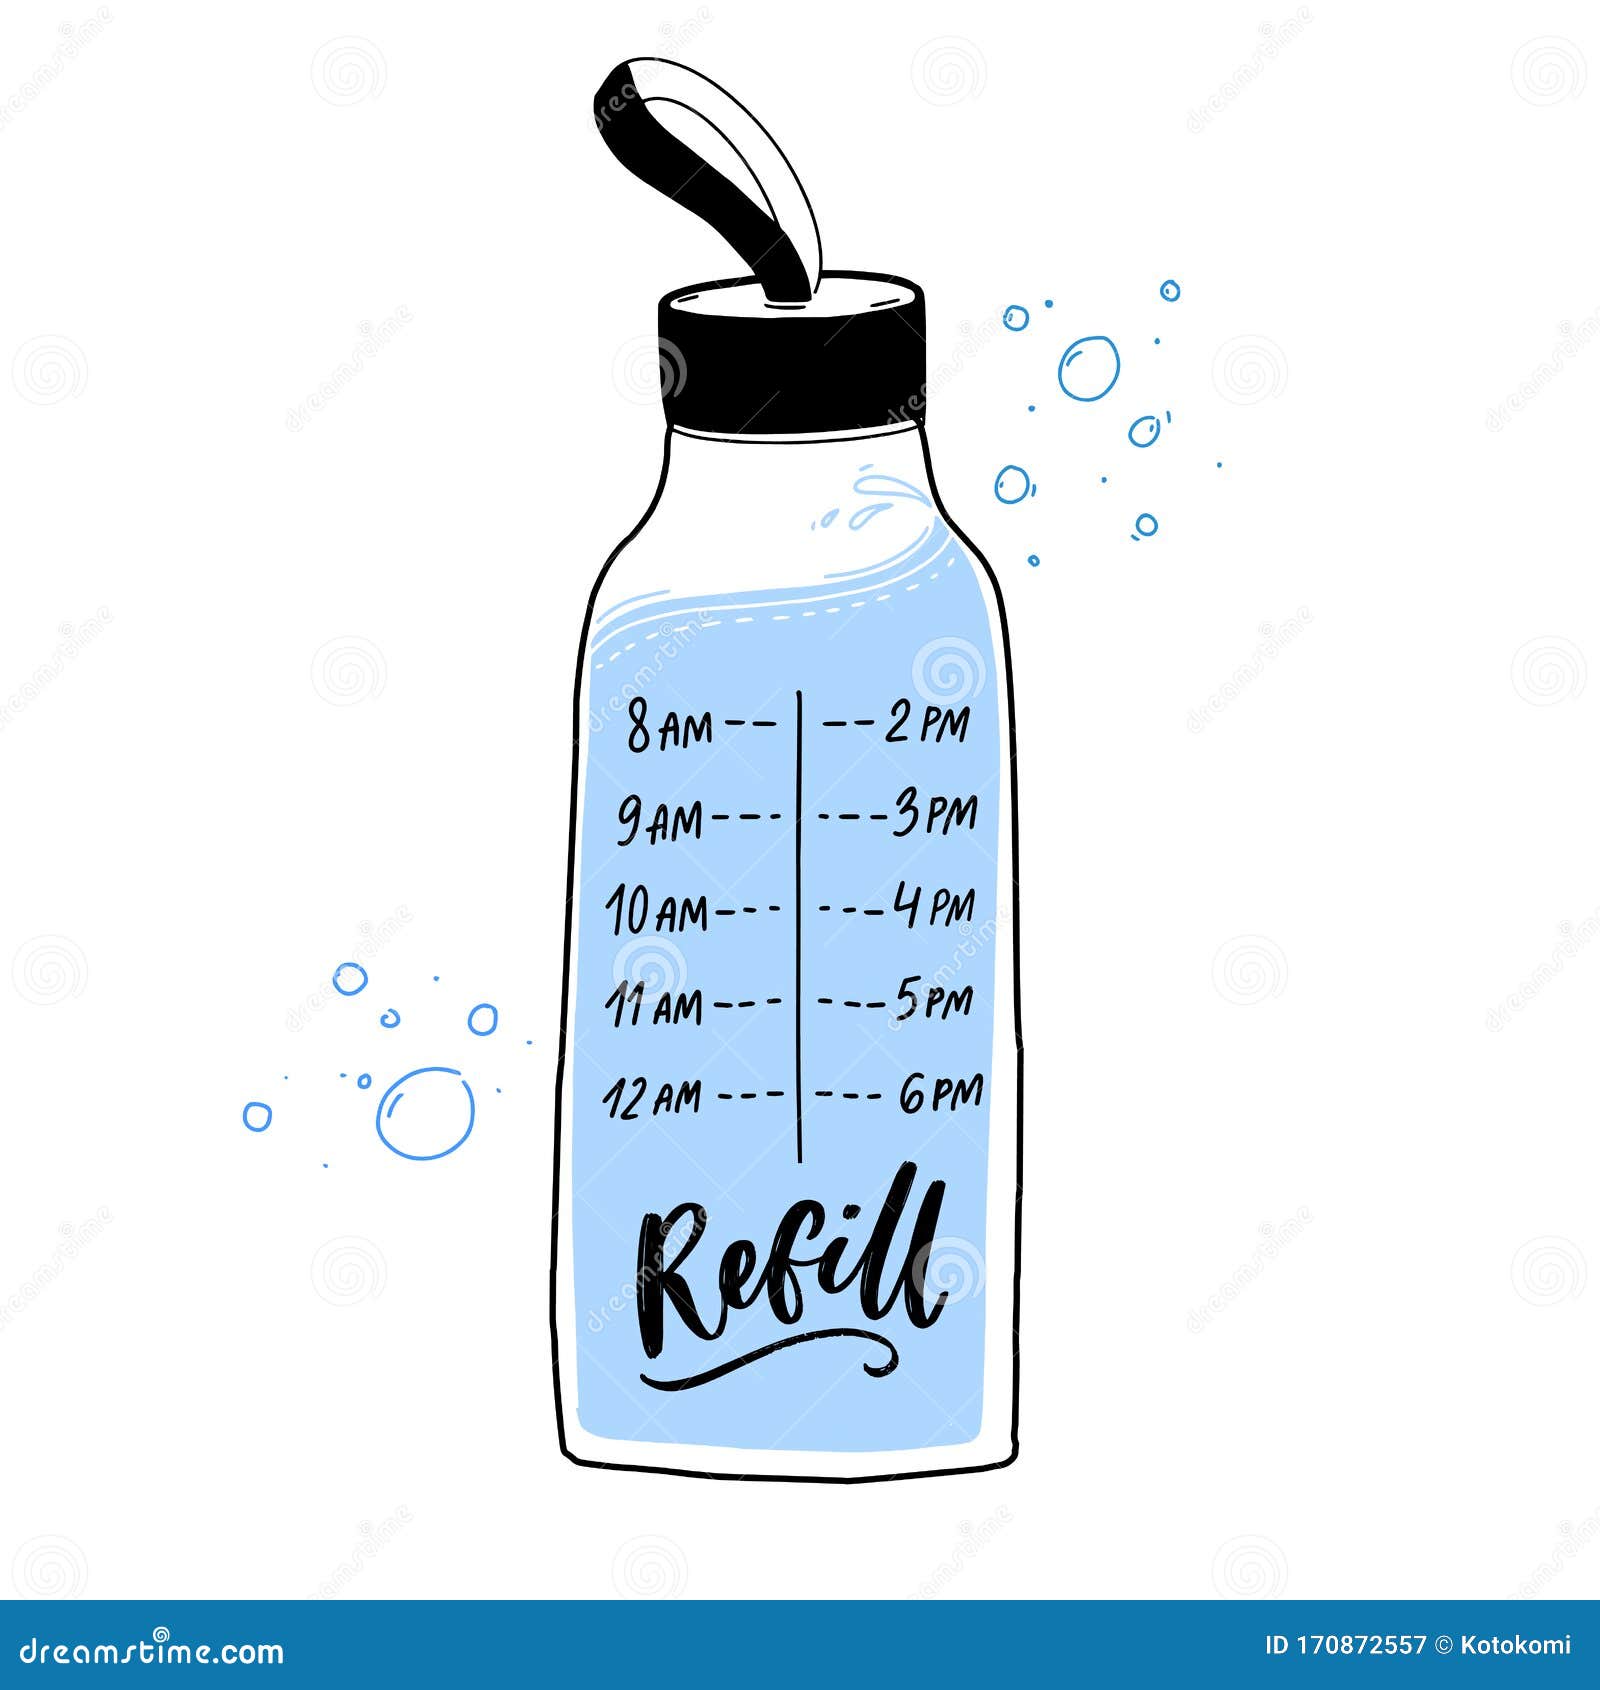 Home & Living :: Decals & Stickers :: Planner Stickers :: Water Habit  Tracker Stickers -Gnome Water Droplet